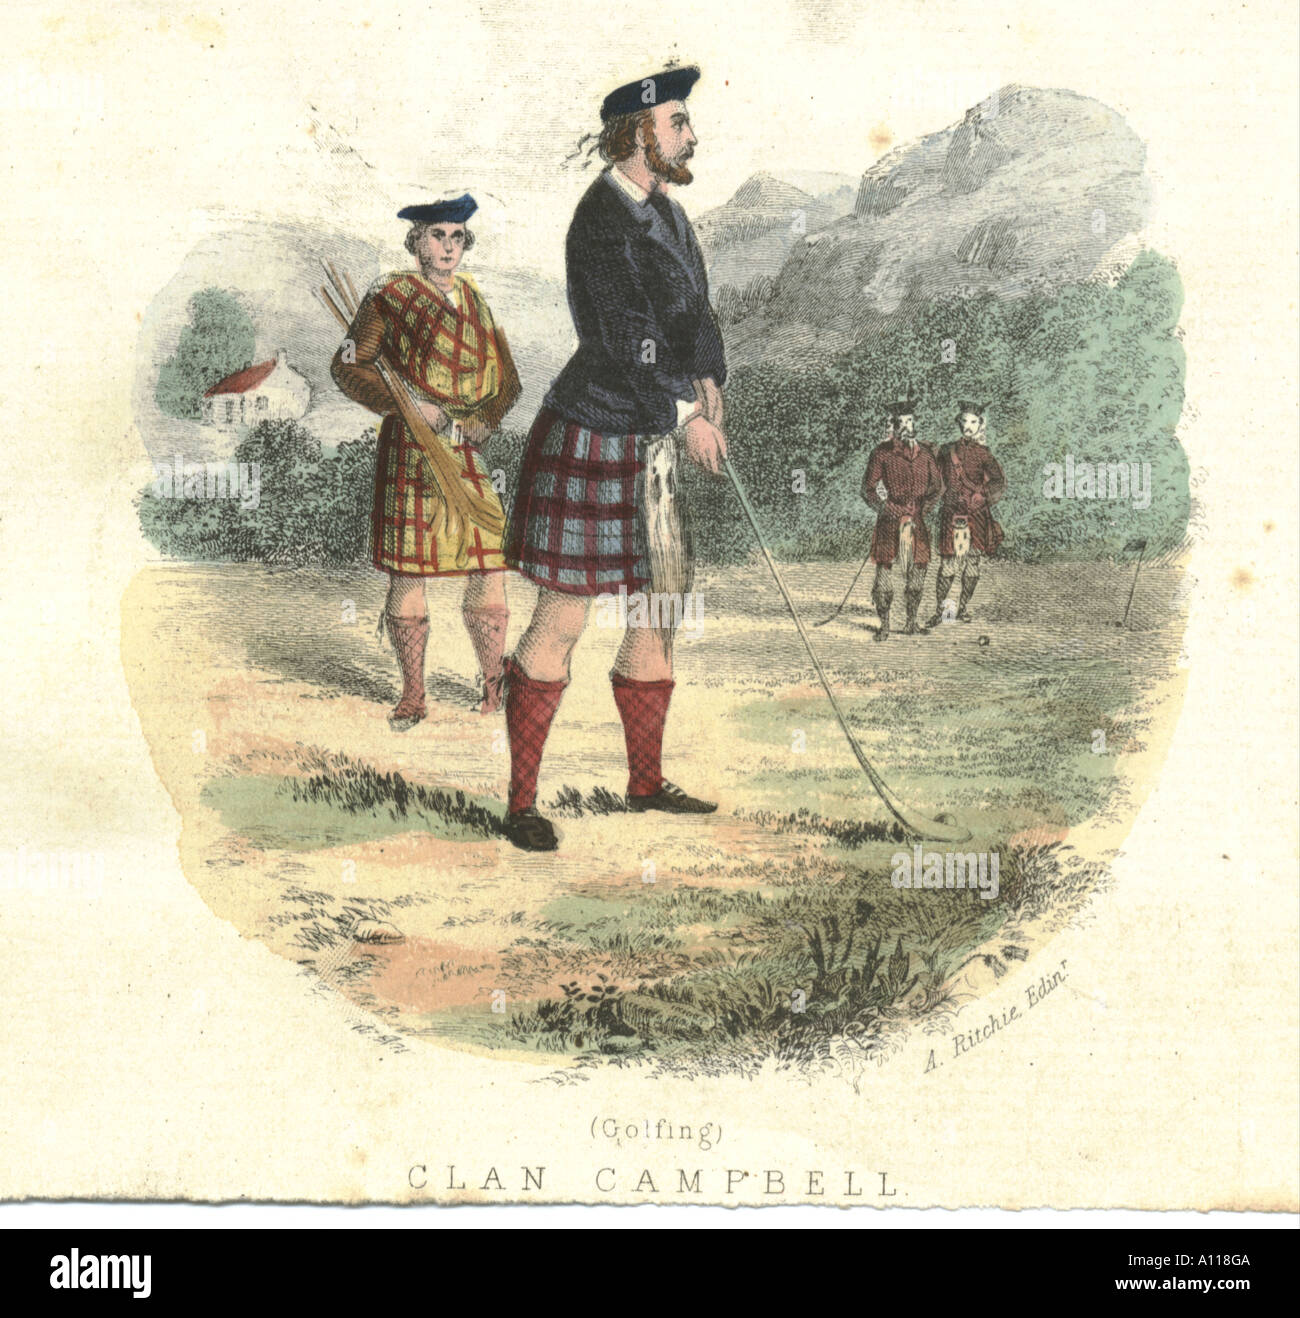 Golfing (Clan Campbell) hand coloured pictorial heading for writing paper c 1850 Stock Photo